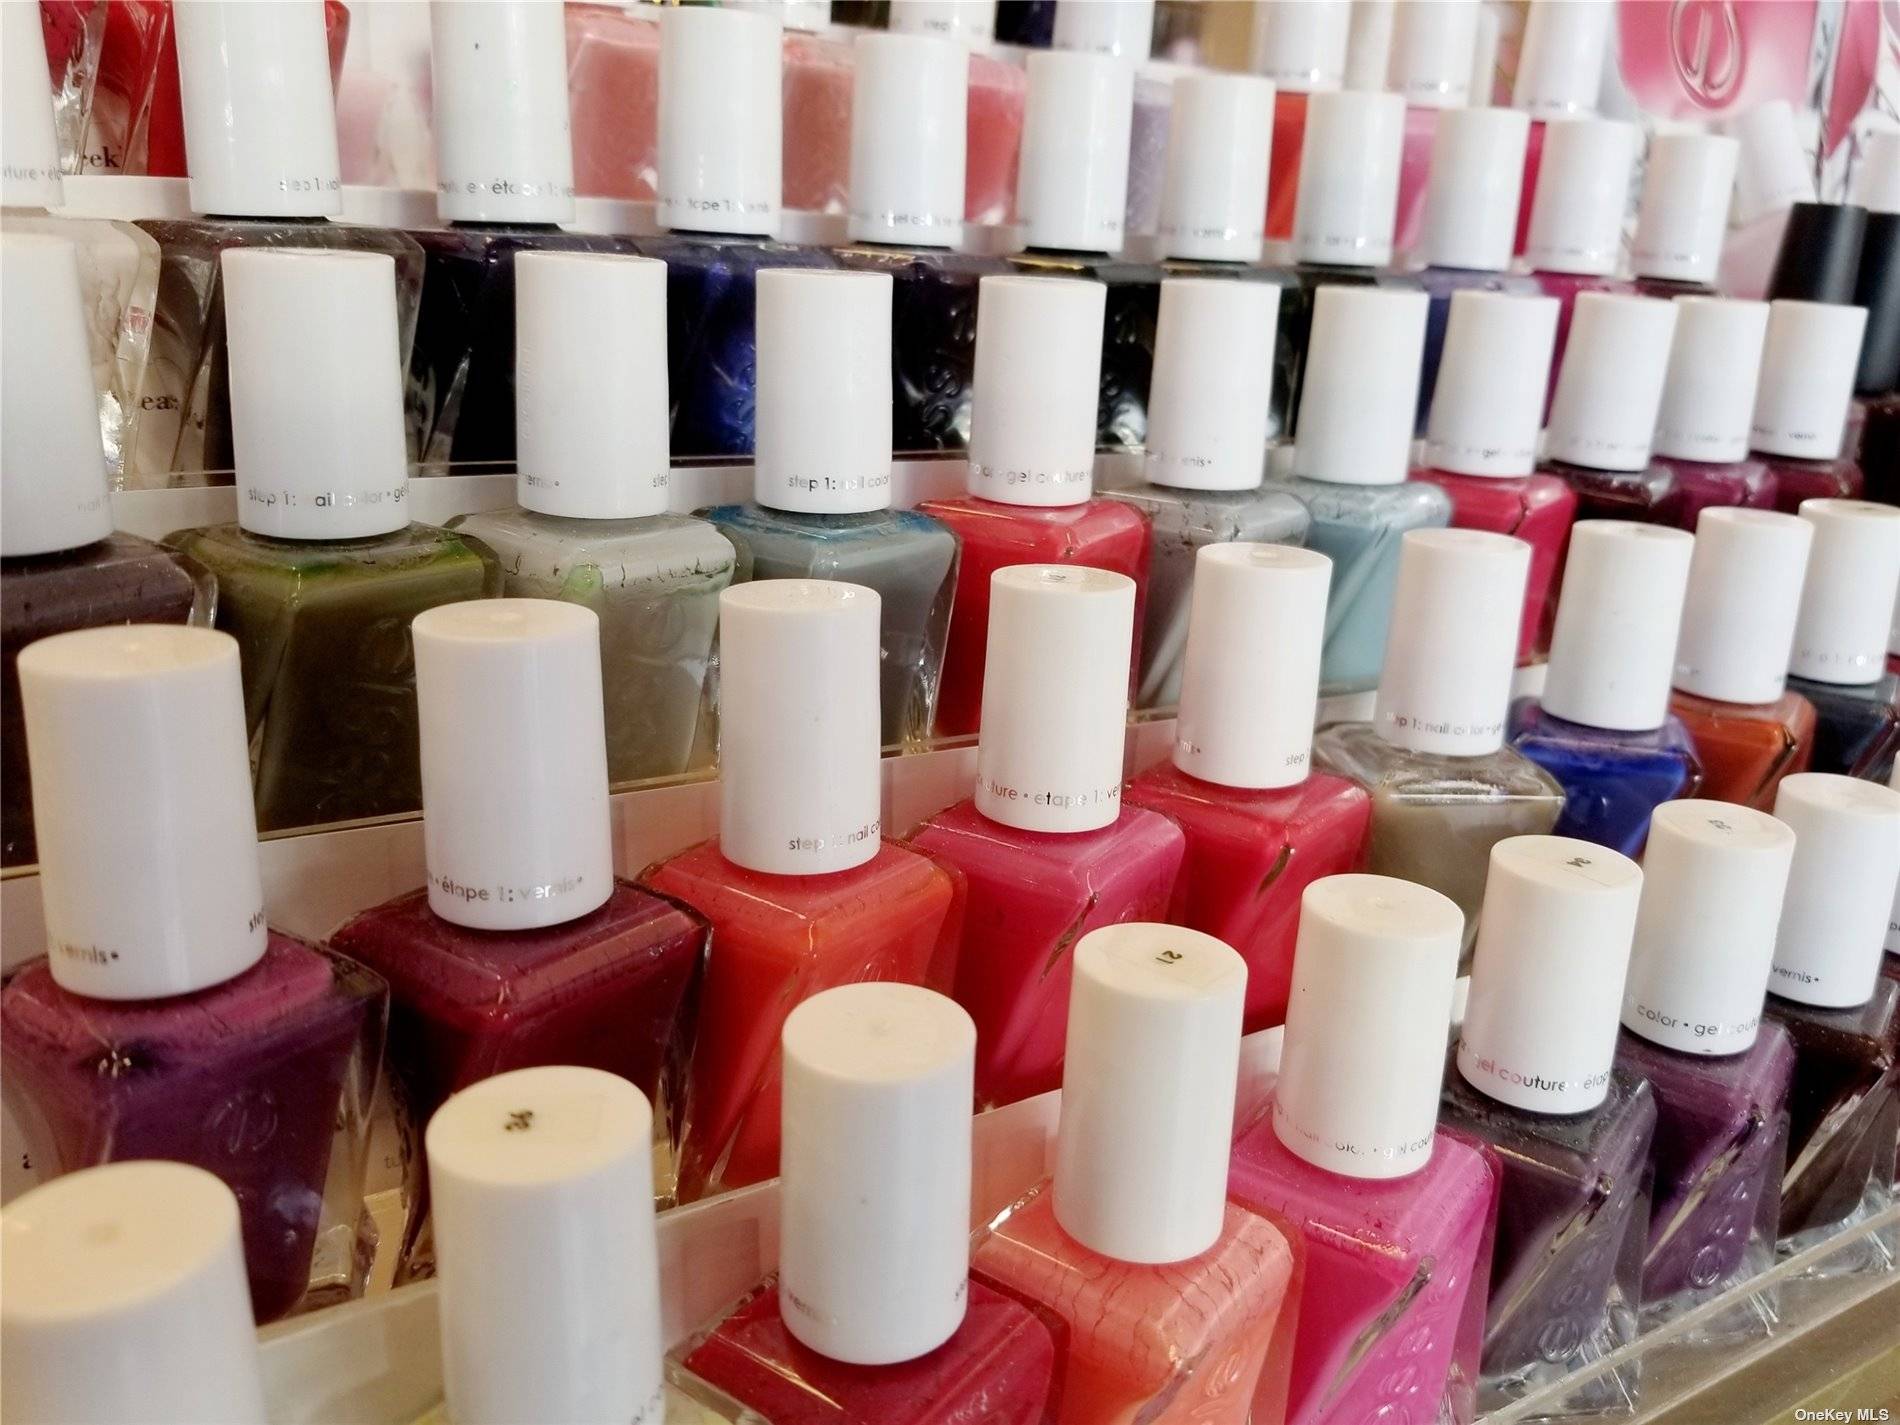 Nail Salon Sales ! Good located in Big Shopping Mall.